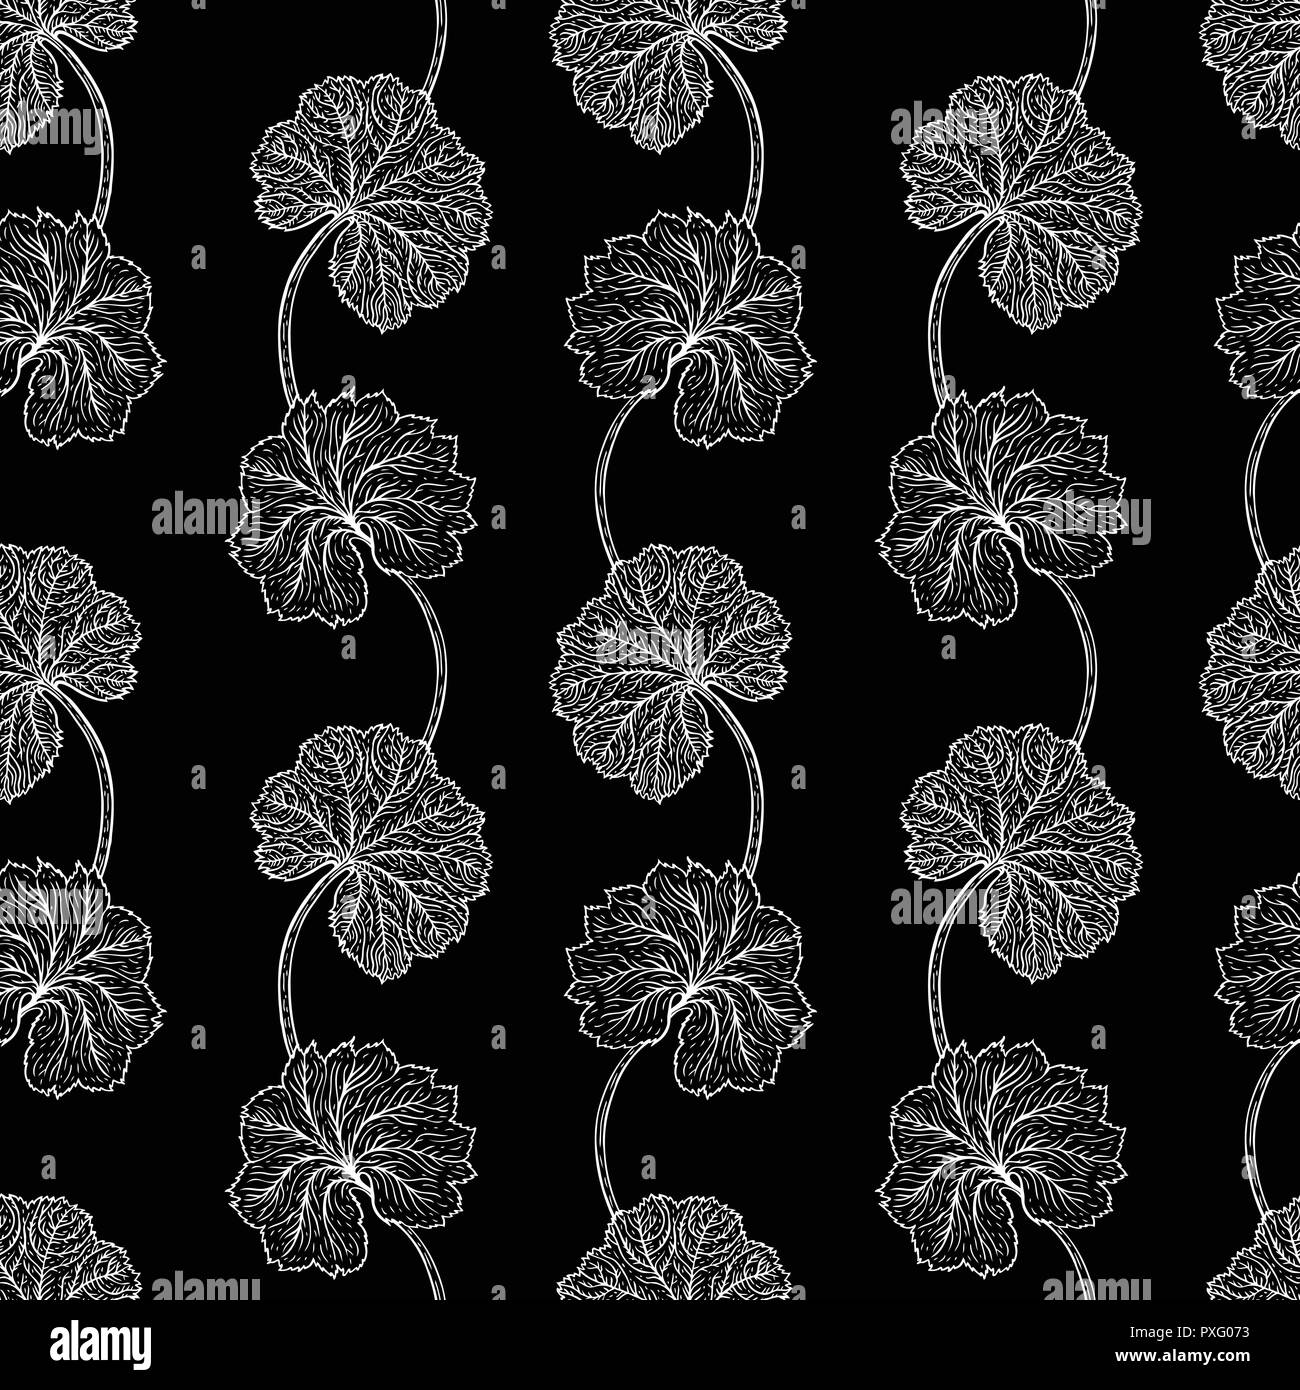 Botanical illustration. Hand Drawn flowers and plants. Monochrome vector illustrations in sketch style. Elegant Seamless vintage Pattern. Stock Vector